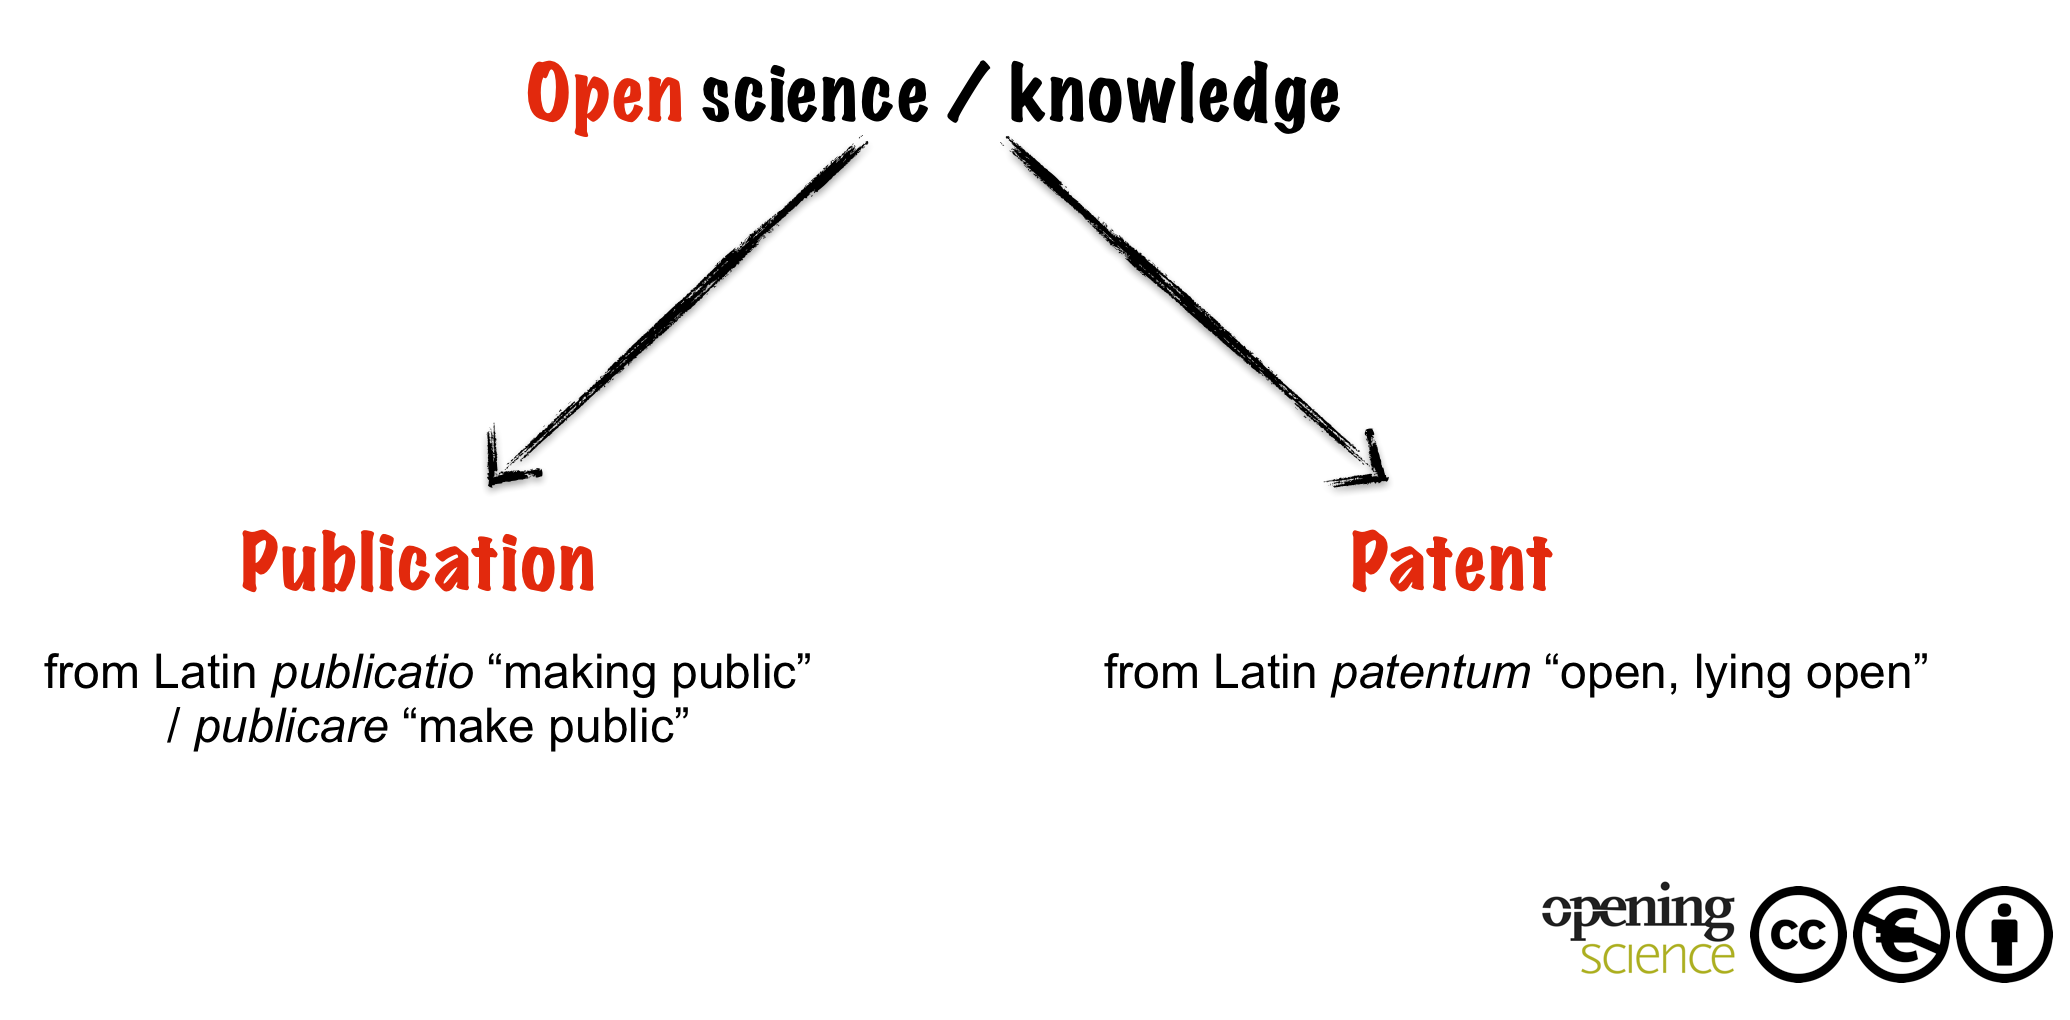 Figure 4. Since the first scientific revolution, science and knowledge creation was open—as open as the methods of the seventeenth century allowed it to be. The Internet has brought about novel methods, thus allowing science to be more open.